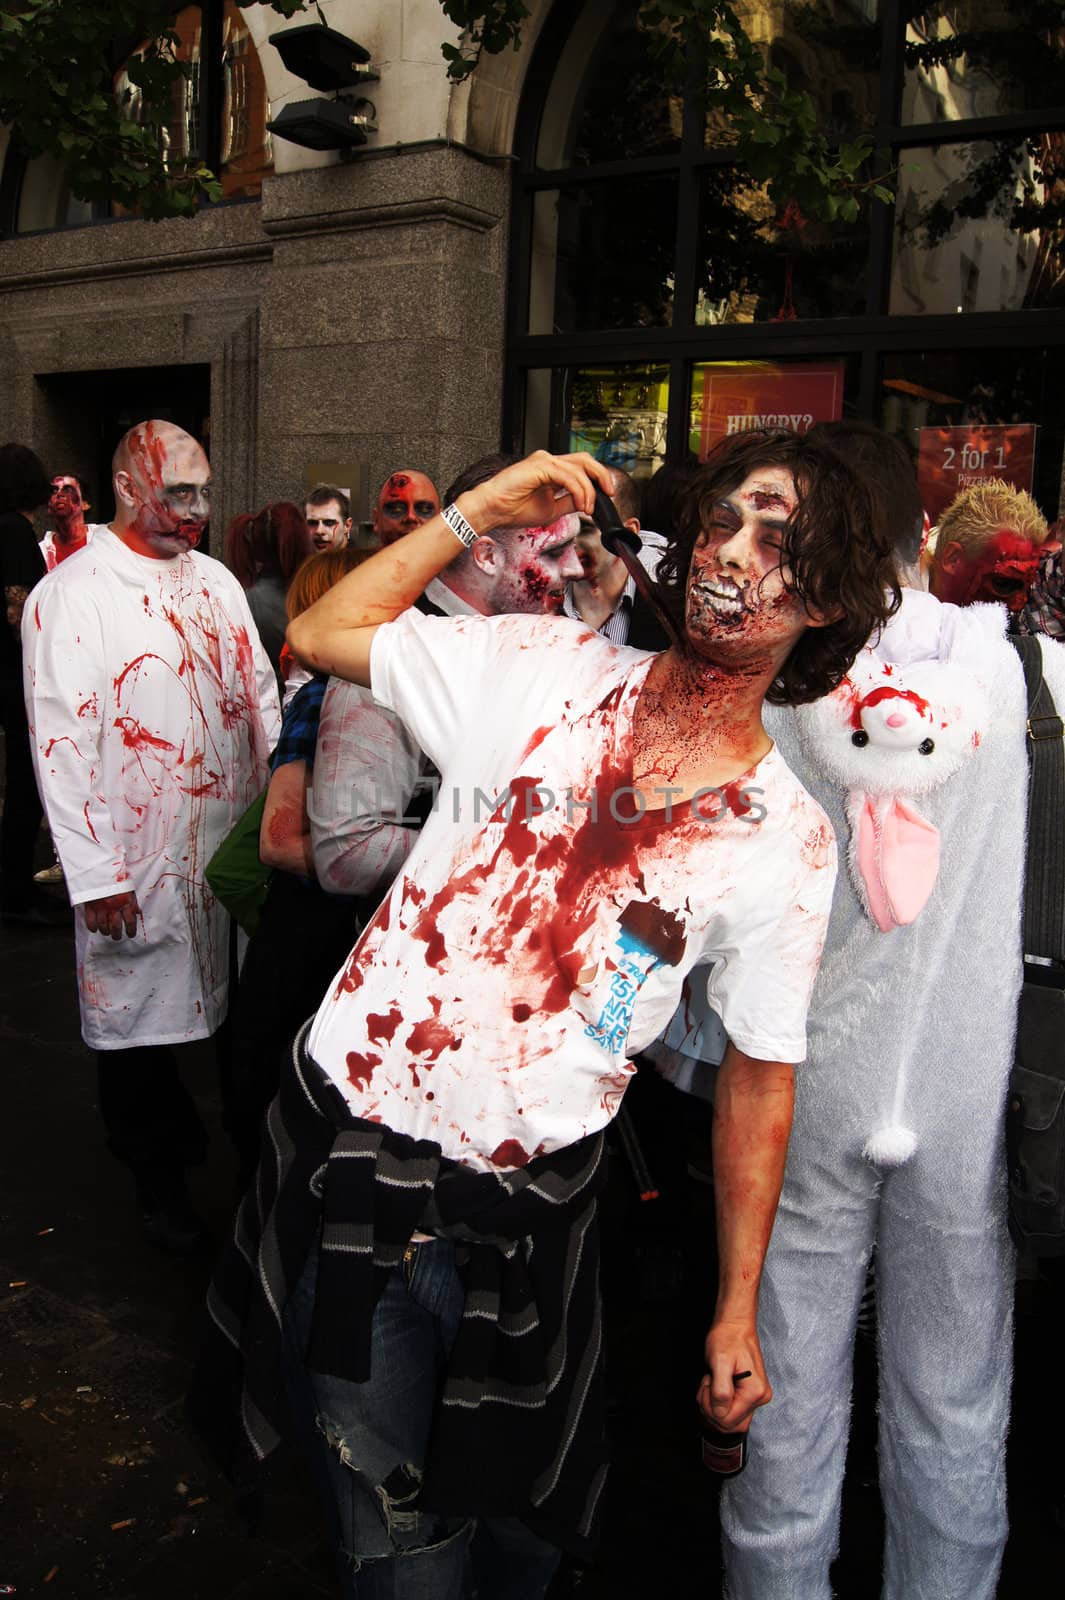 LONDON - October 30: Zombies at the 2010 London Zombie Walk October 30, 2010 in Chinatown London, England. 